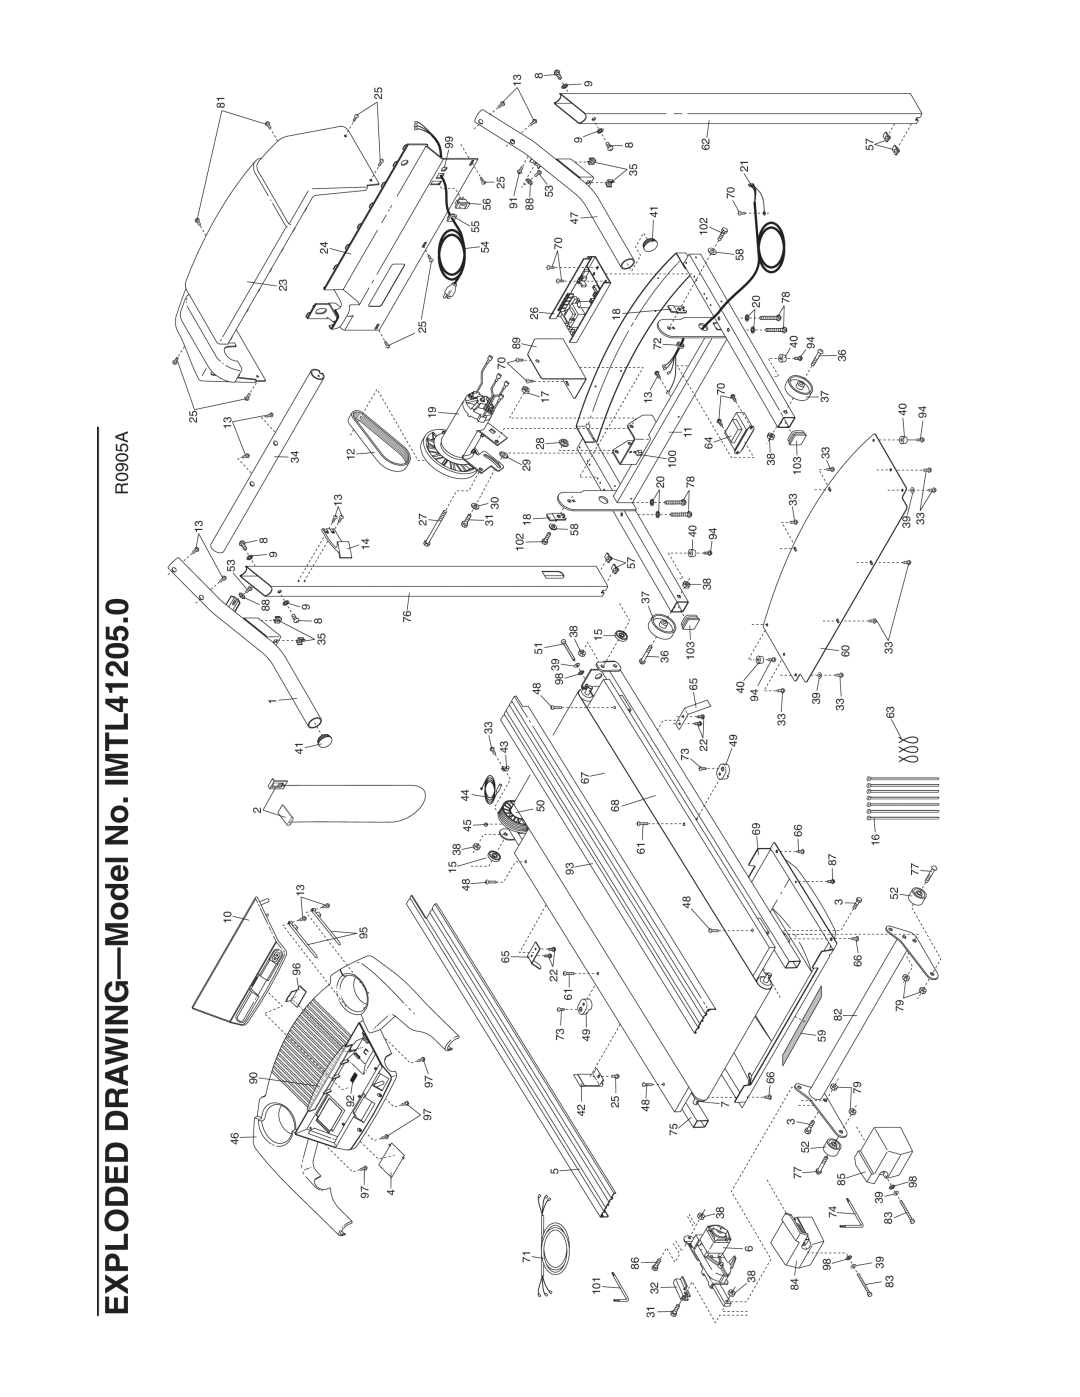 Image user manual EXPLODED DRAWING-Model No. IMTL41205.0, R0905A 